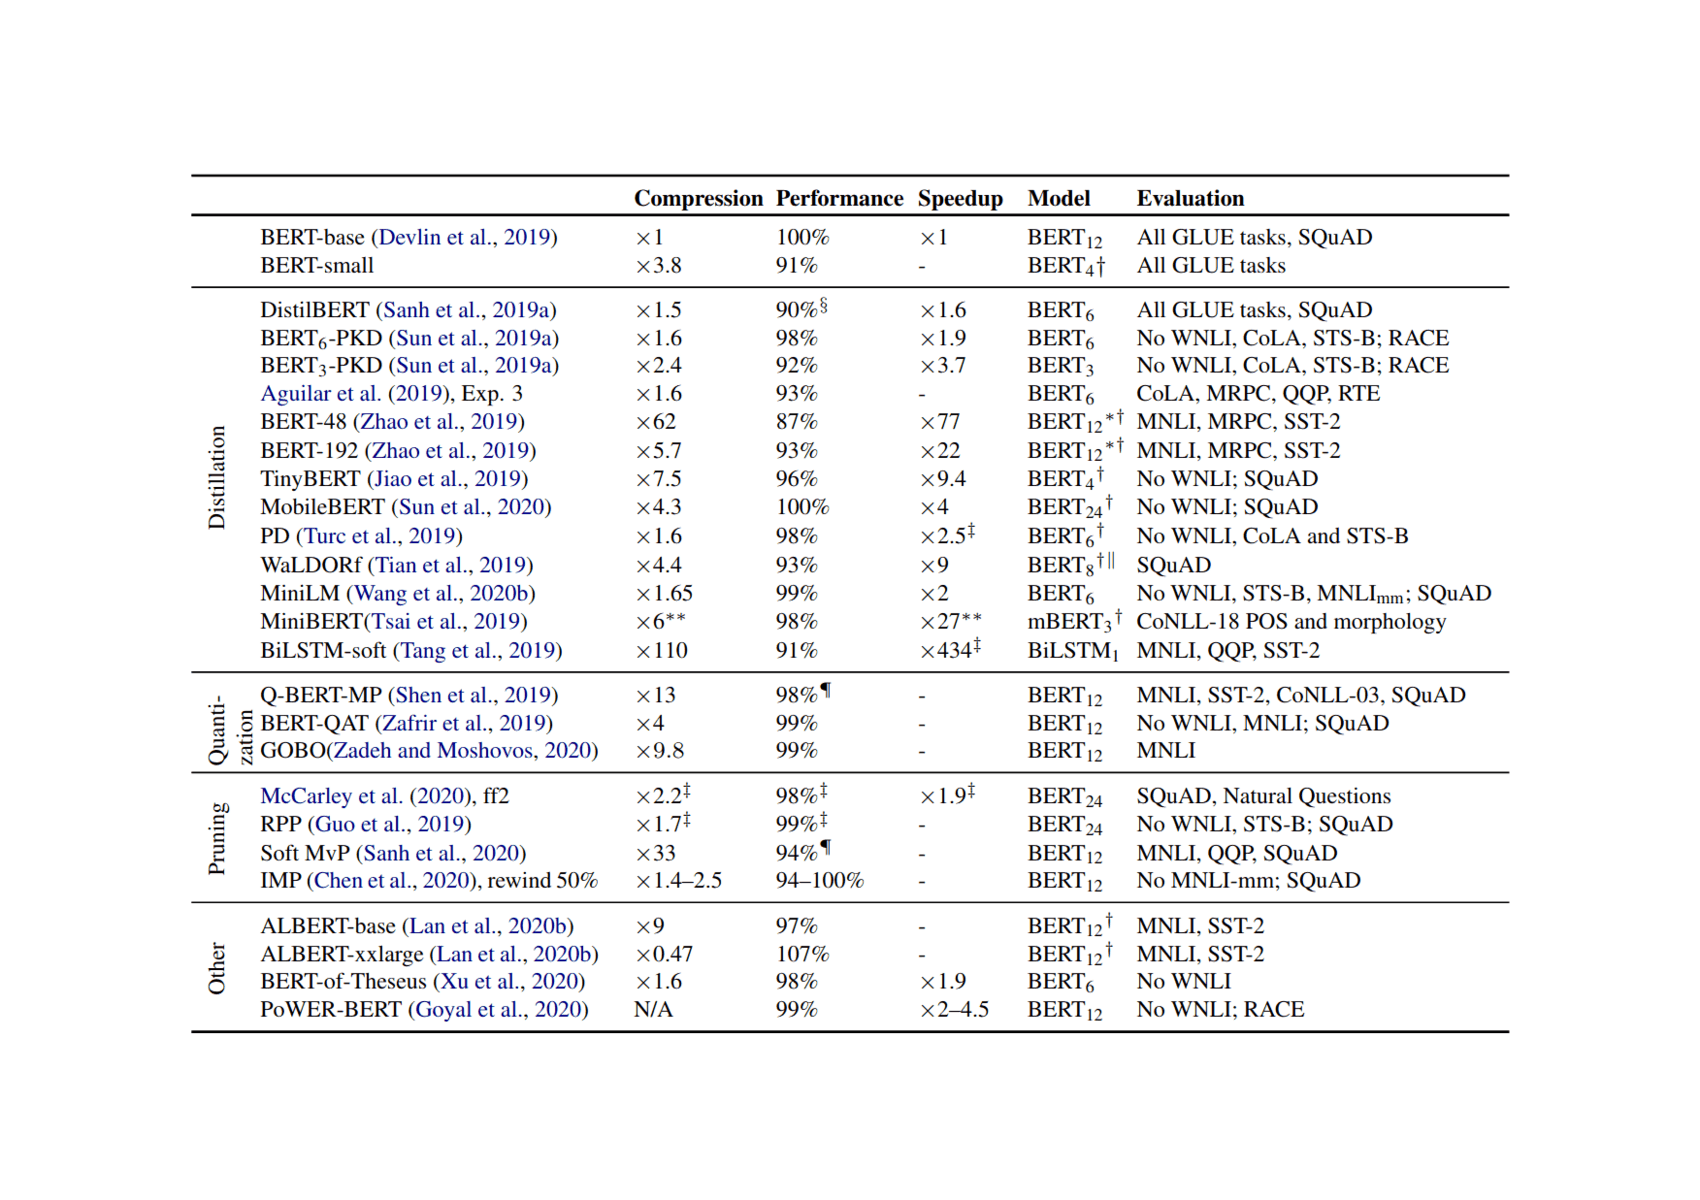 Table 1: Comparison of BERT compression studies. Compression, performance retention, inference time speedup figures are given with respect to BERTbase, unless indicated otherwise. Performance retention is measured as a ratio of average scores achieved by a given model and by BERTbase. The subscript in the model description reflects the number of layers used.